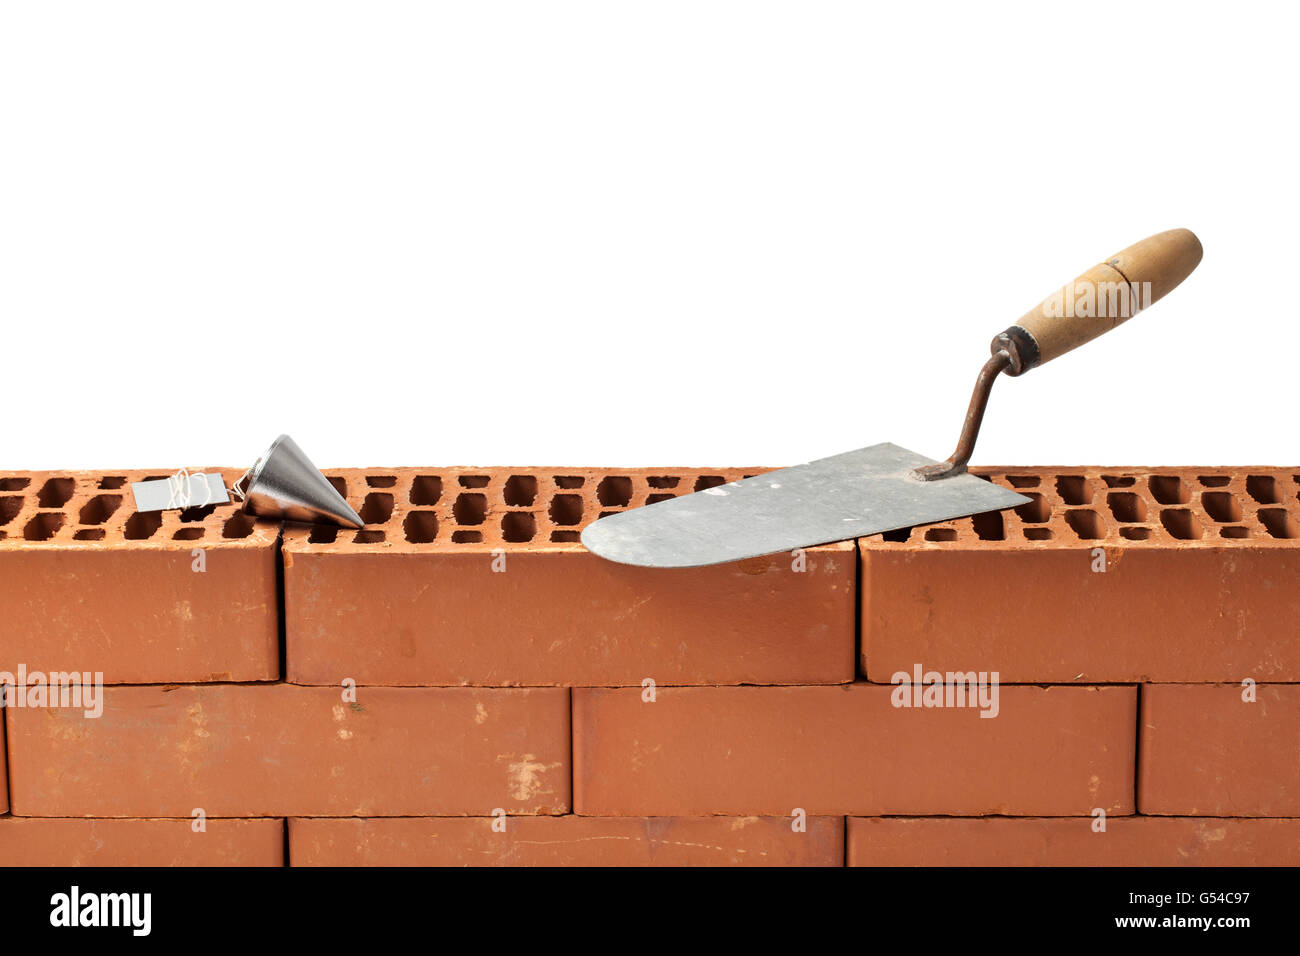 Construction tools trowel and plumb bob left on a new brickwork isolated on white. Stock Photo